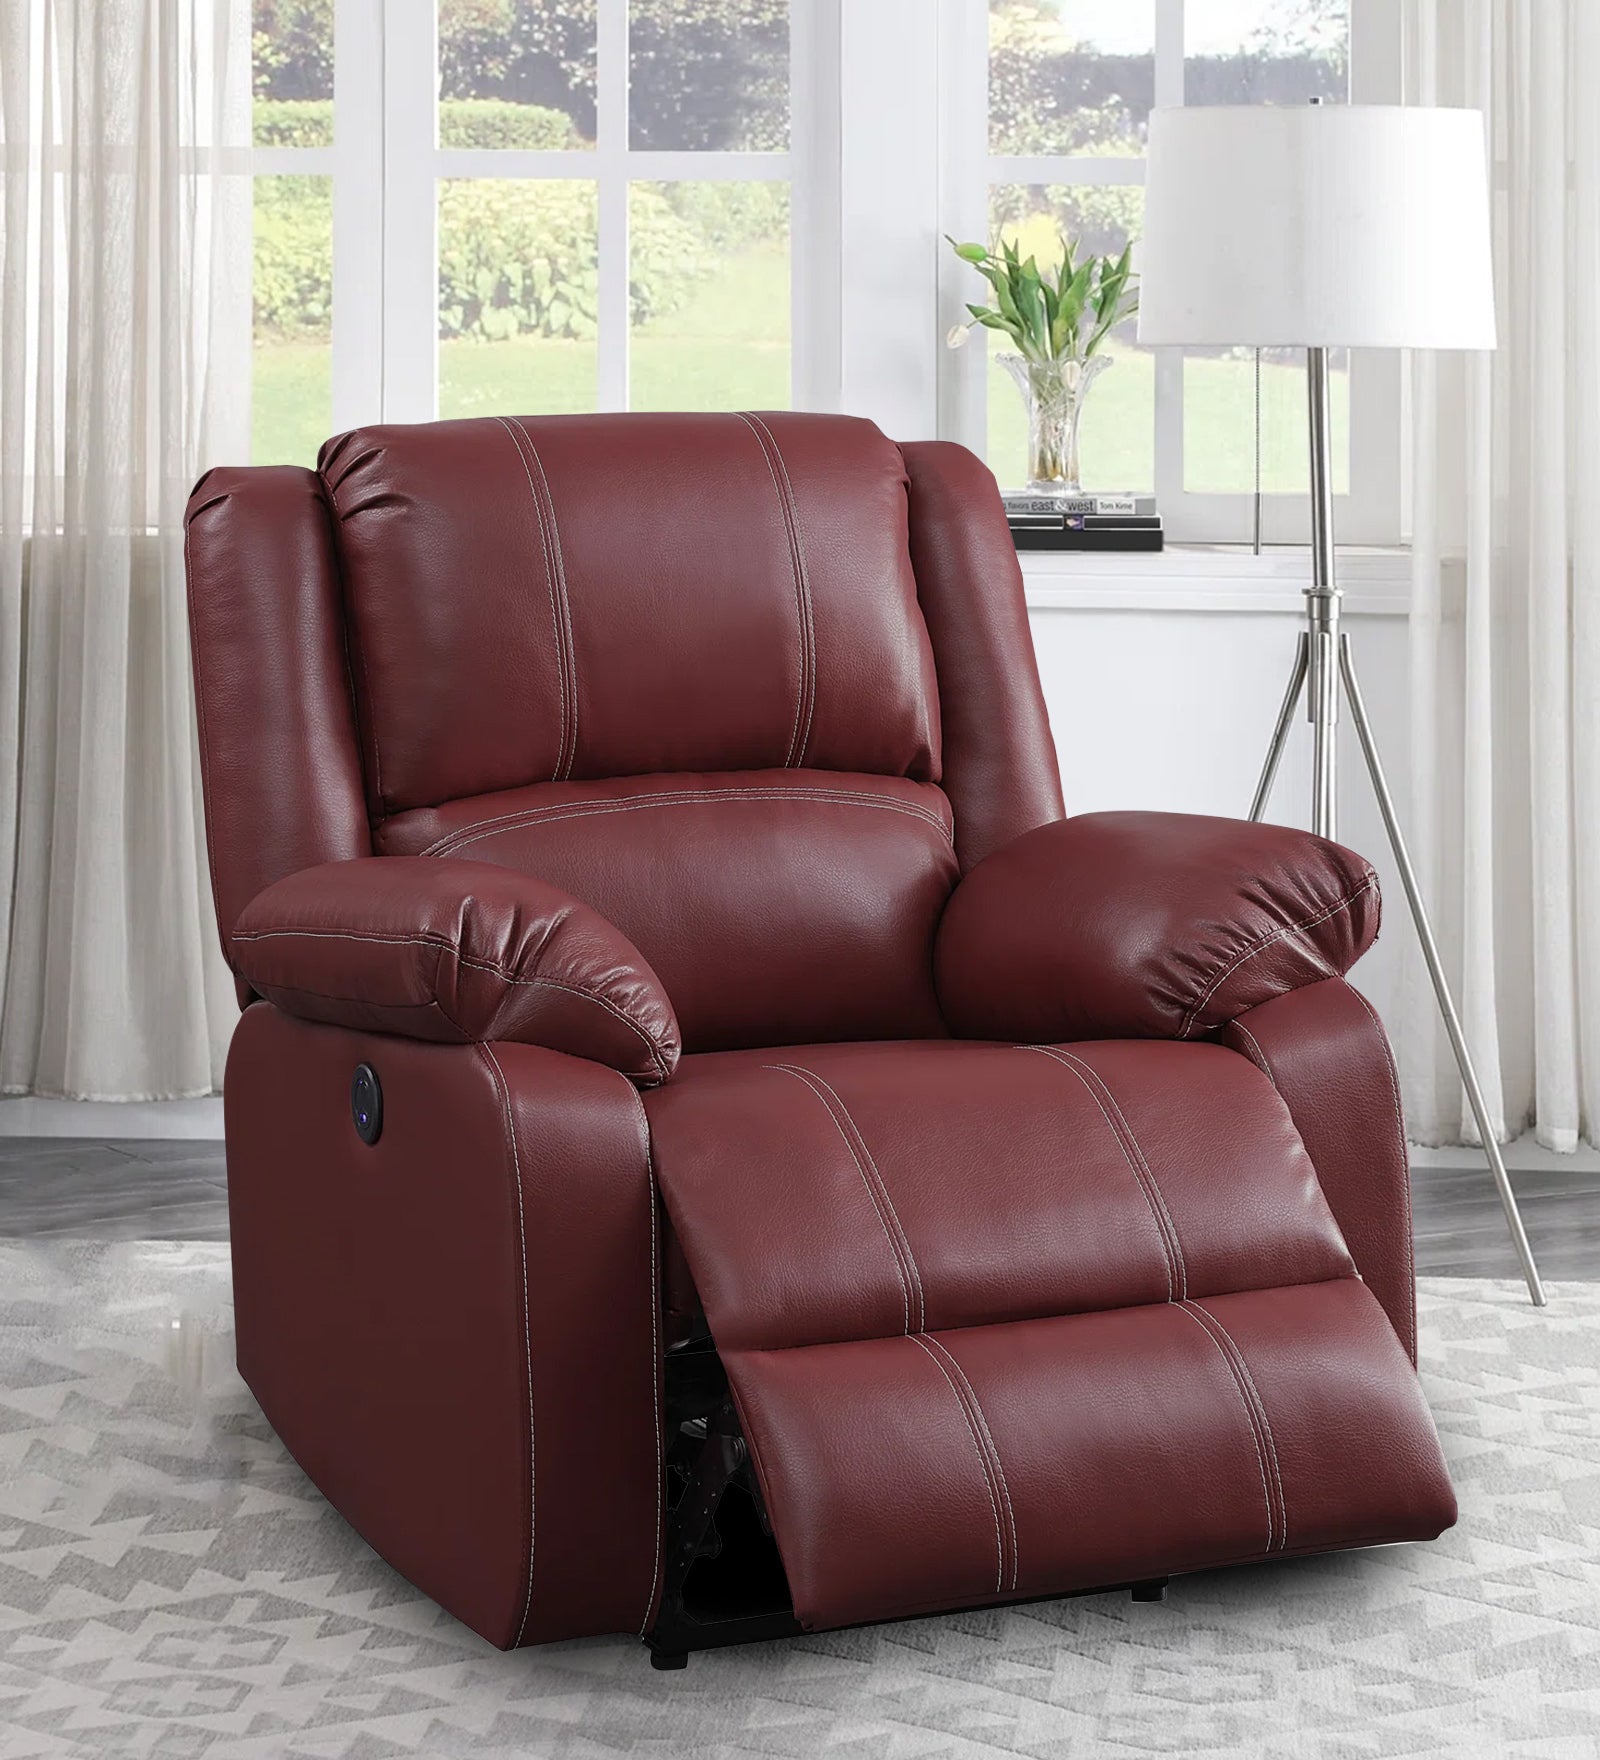 Santo Leather Motorized 1 Seater Recliner In Red Maroon Leather Finish